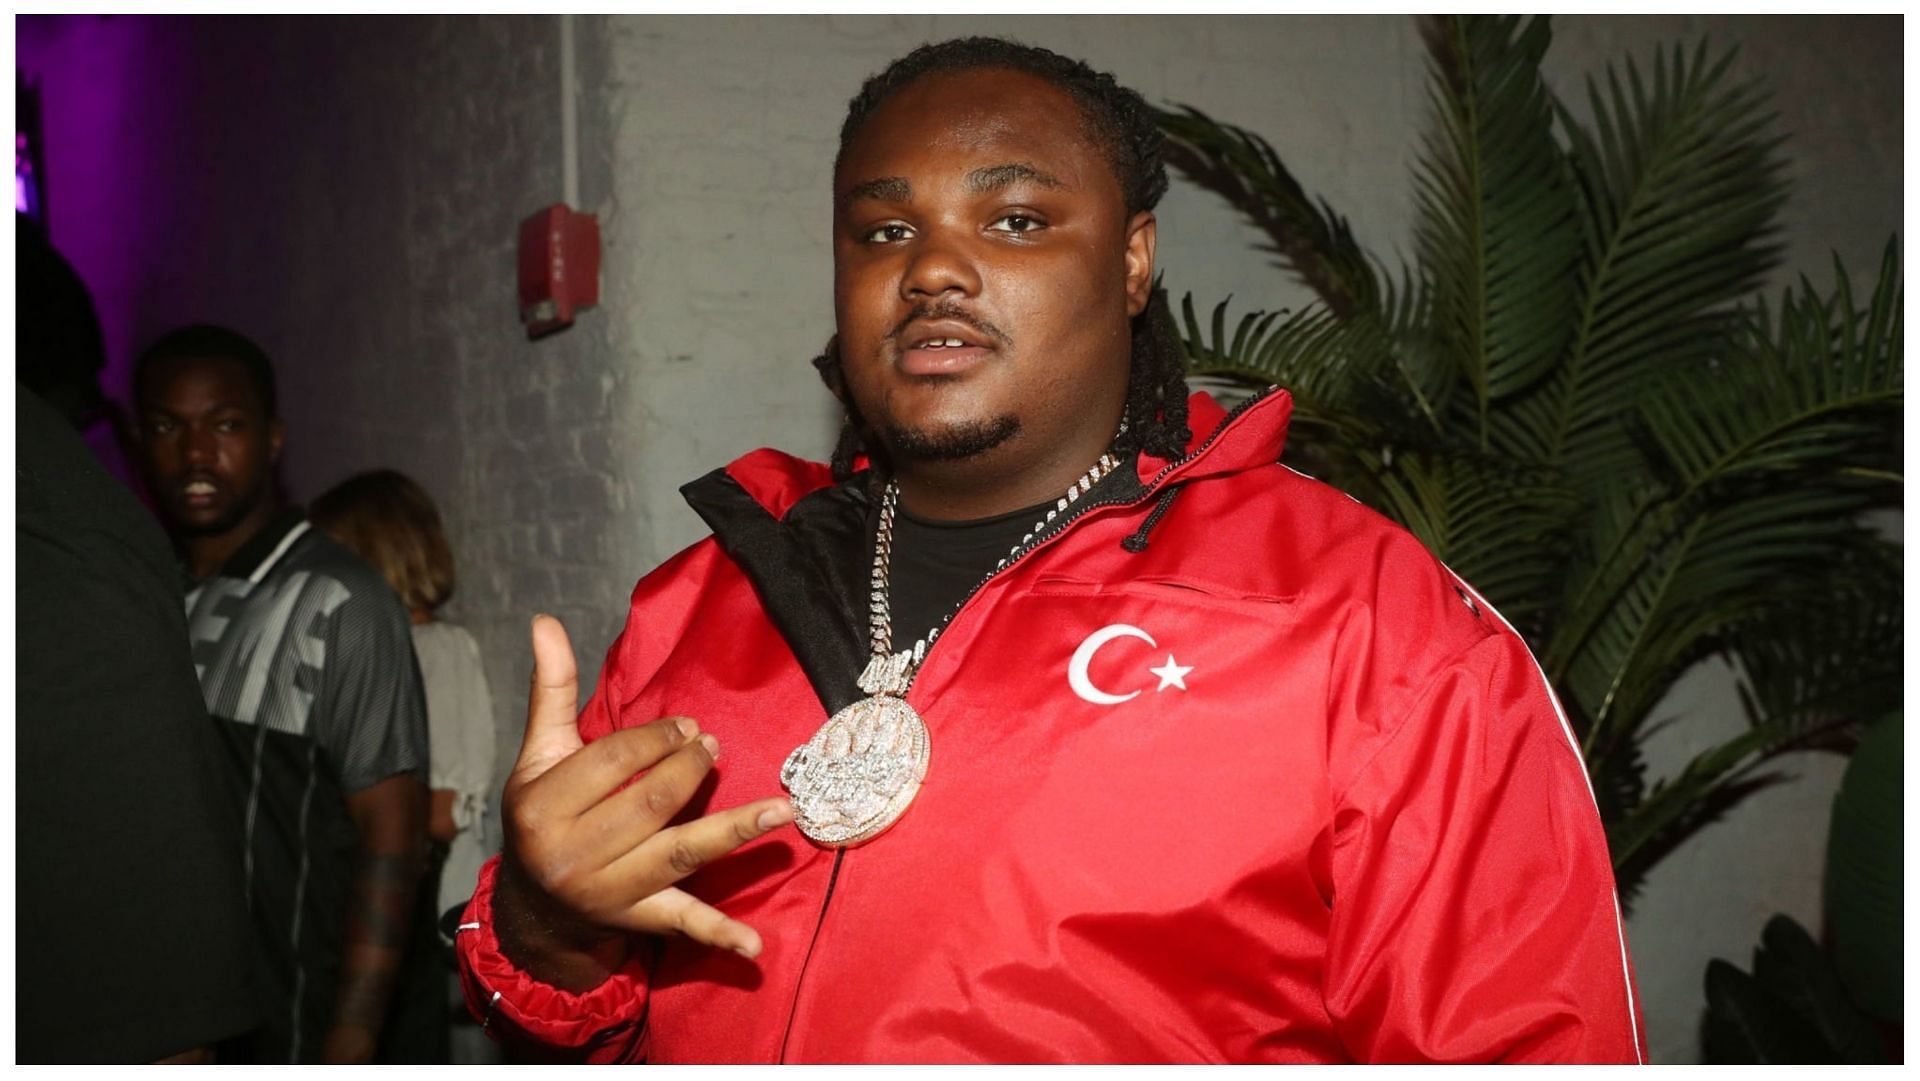 Tee Grizzley has earned a lot from his career in the music industry (Image via Johnny Nunez/Getty Images)